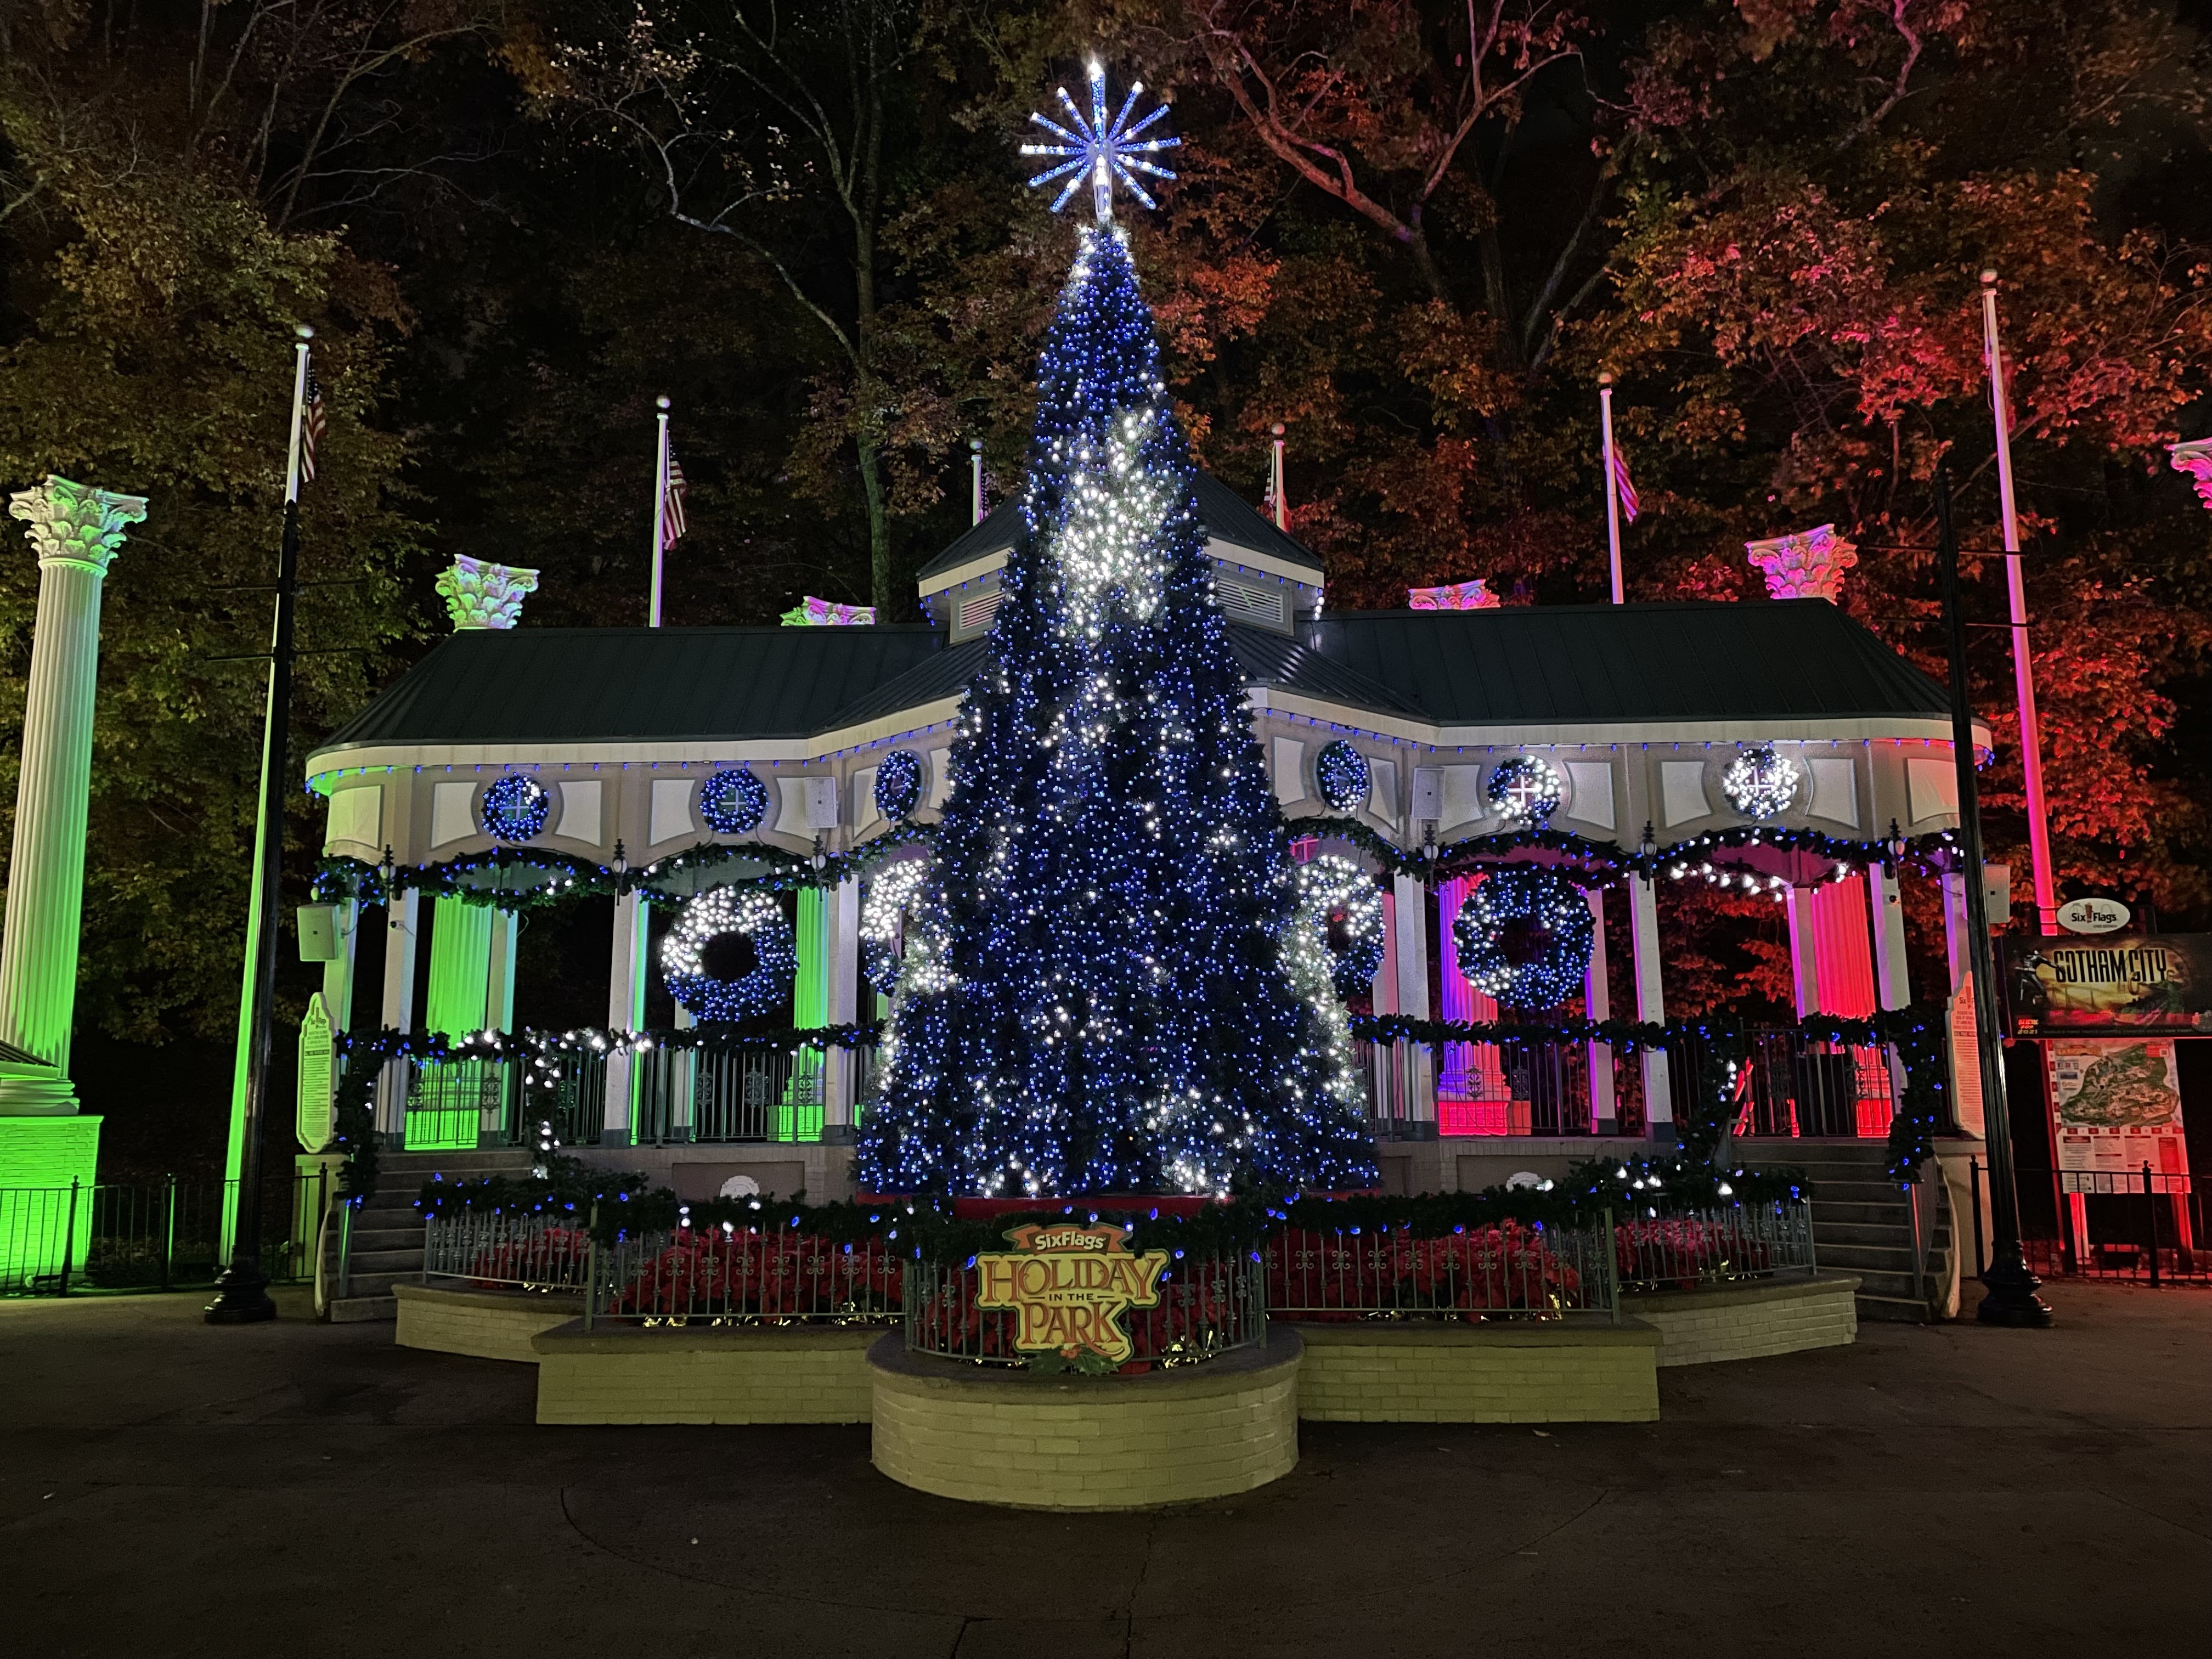 Holiday in the Park Brings Festive Cheer to Six Flags Over Georgia